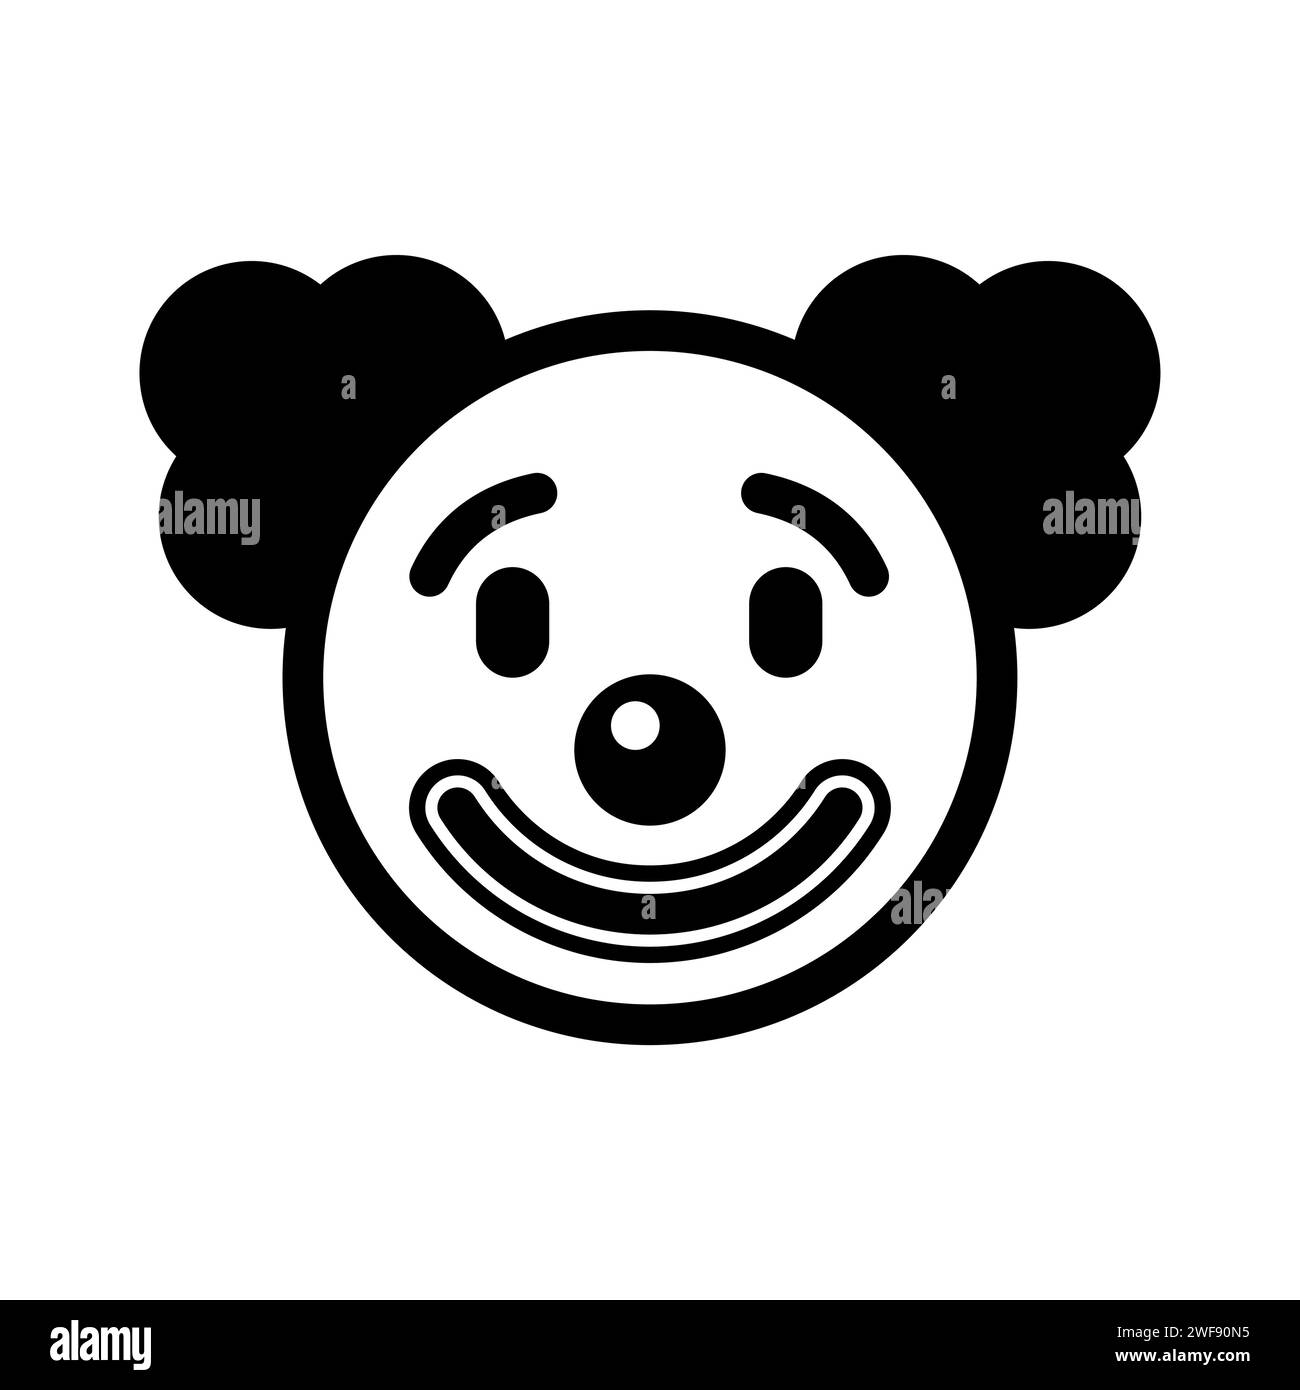 Clown face icon. Circus carnival Fun cute smile mask face. Cheerful funny comedian joker character symbol. Vector illustration. Stock Vector